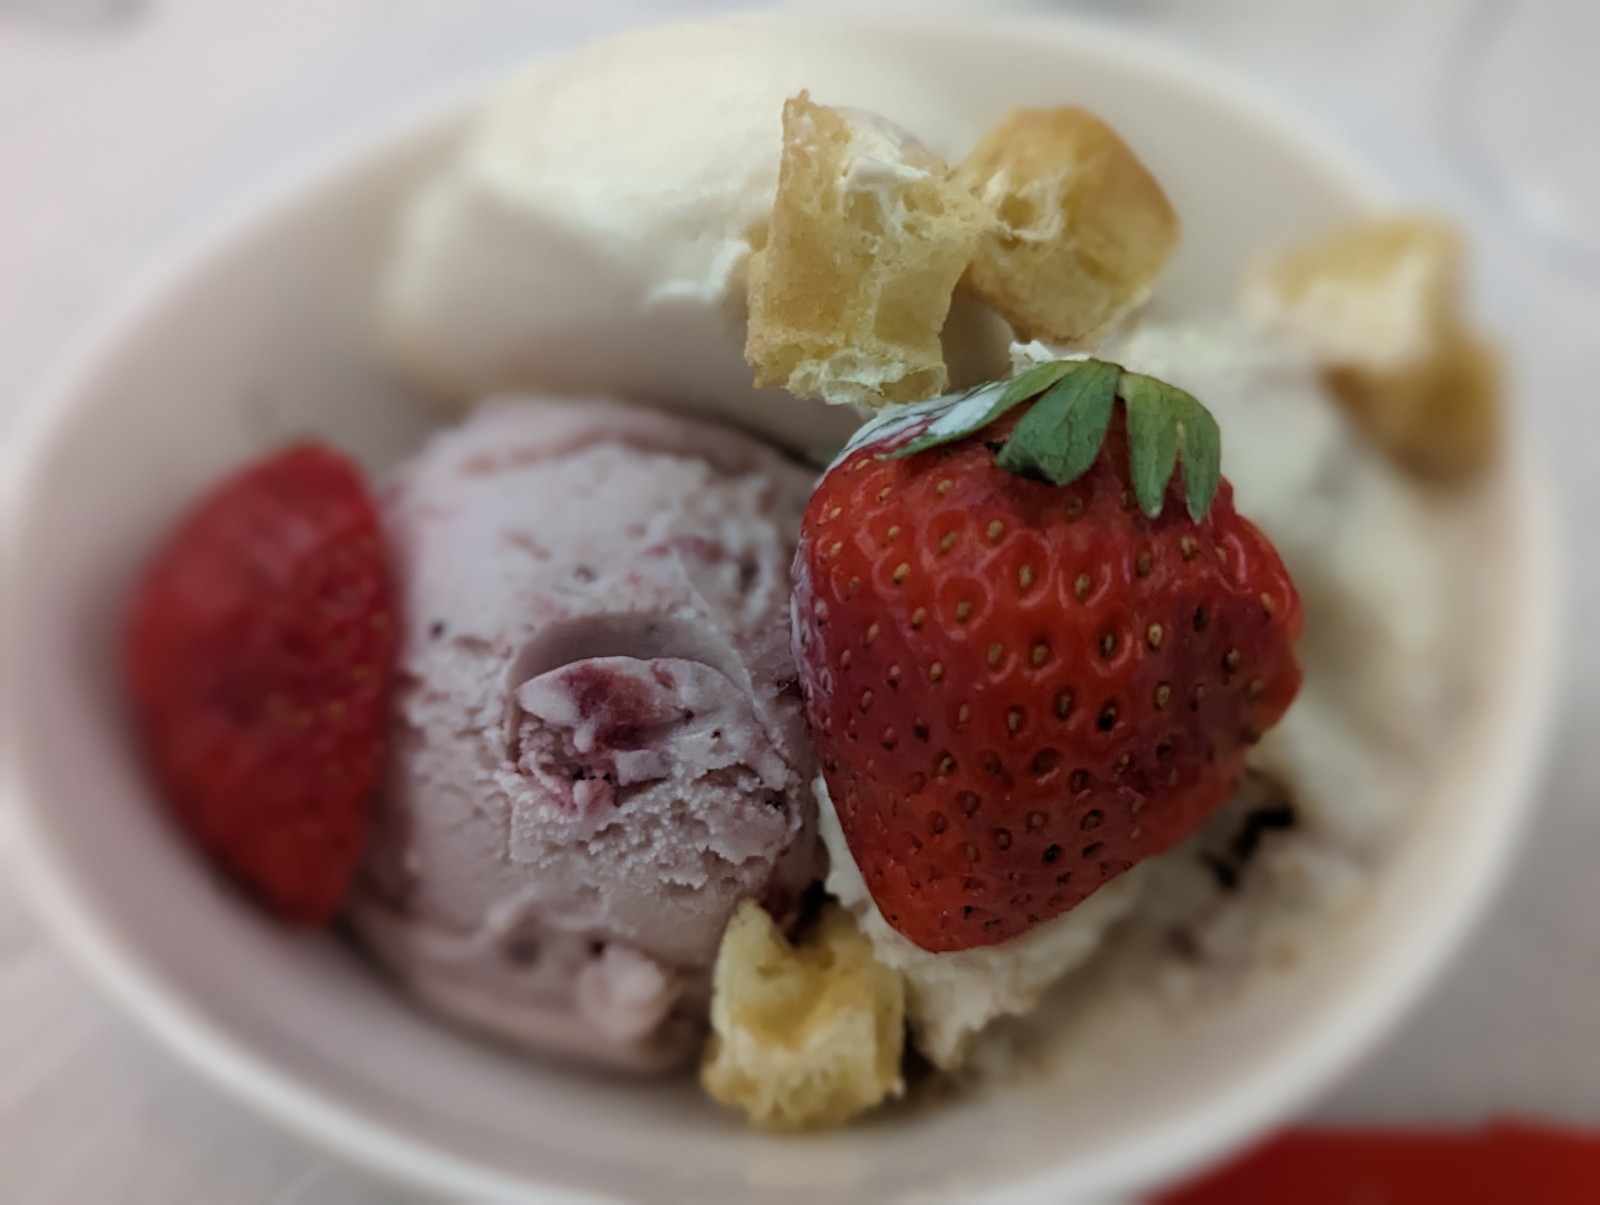 a bowl of ice cream and strawberries